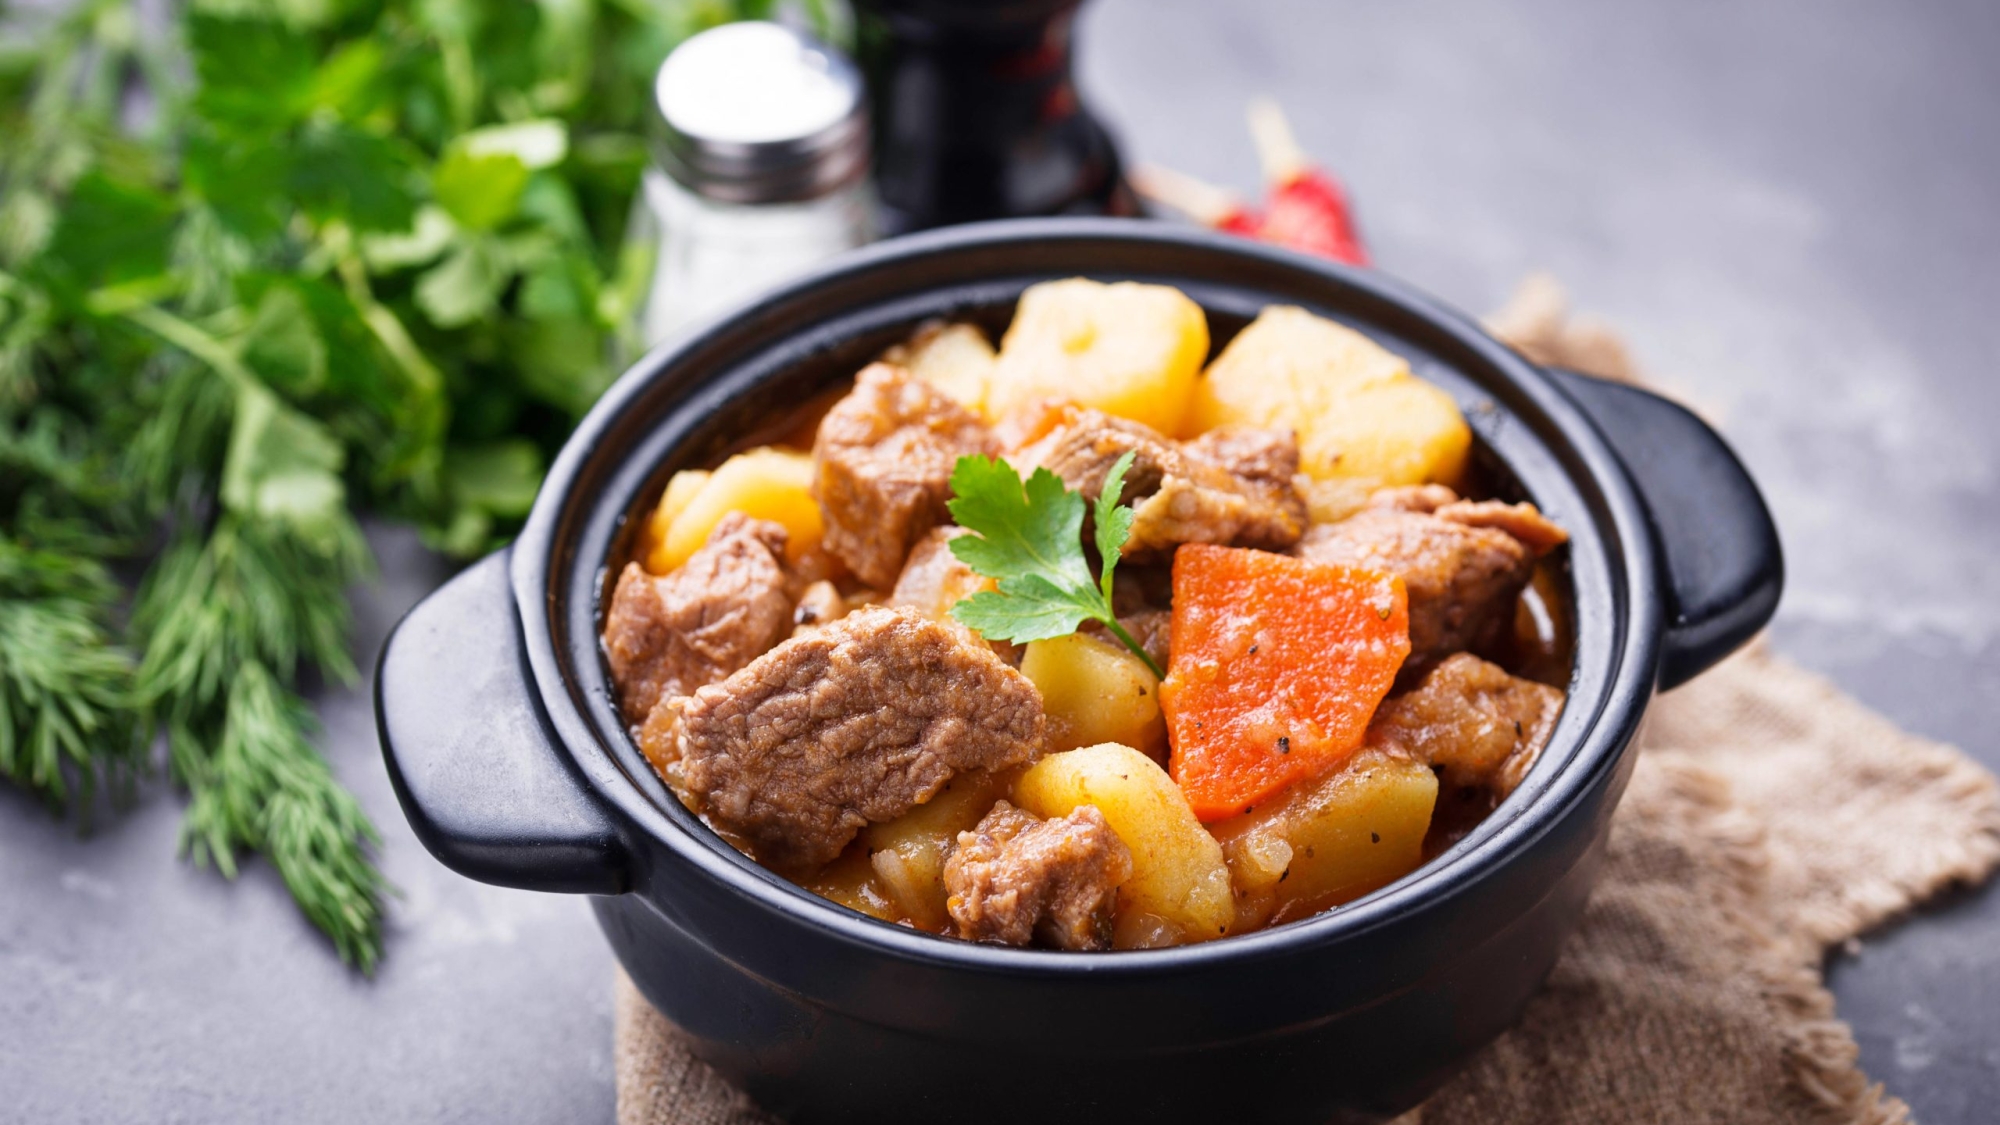 Beef stew with potato and carrot. Selective focus